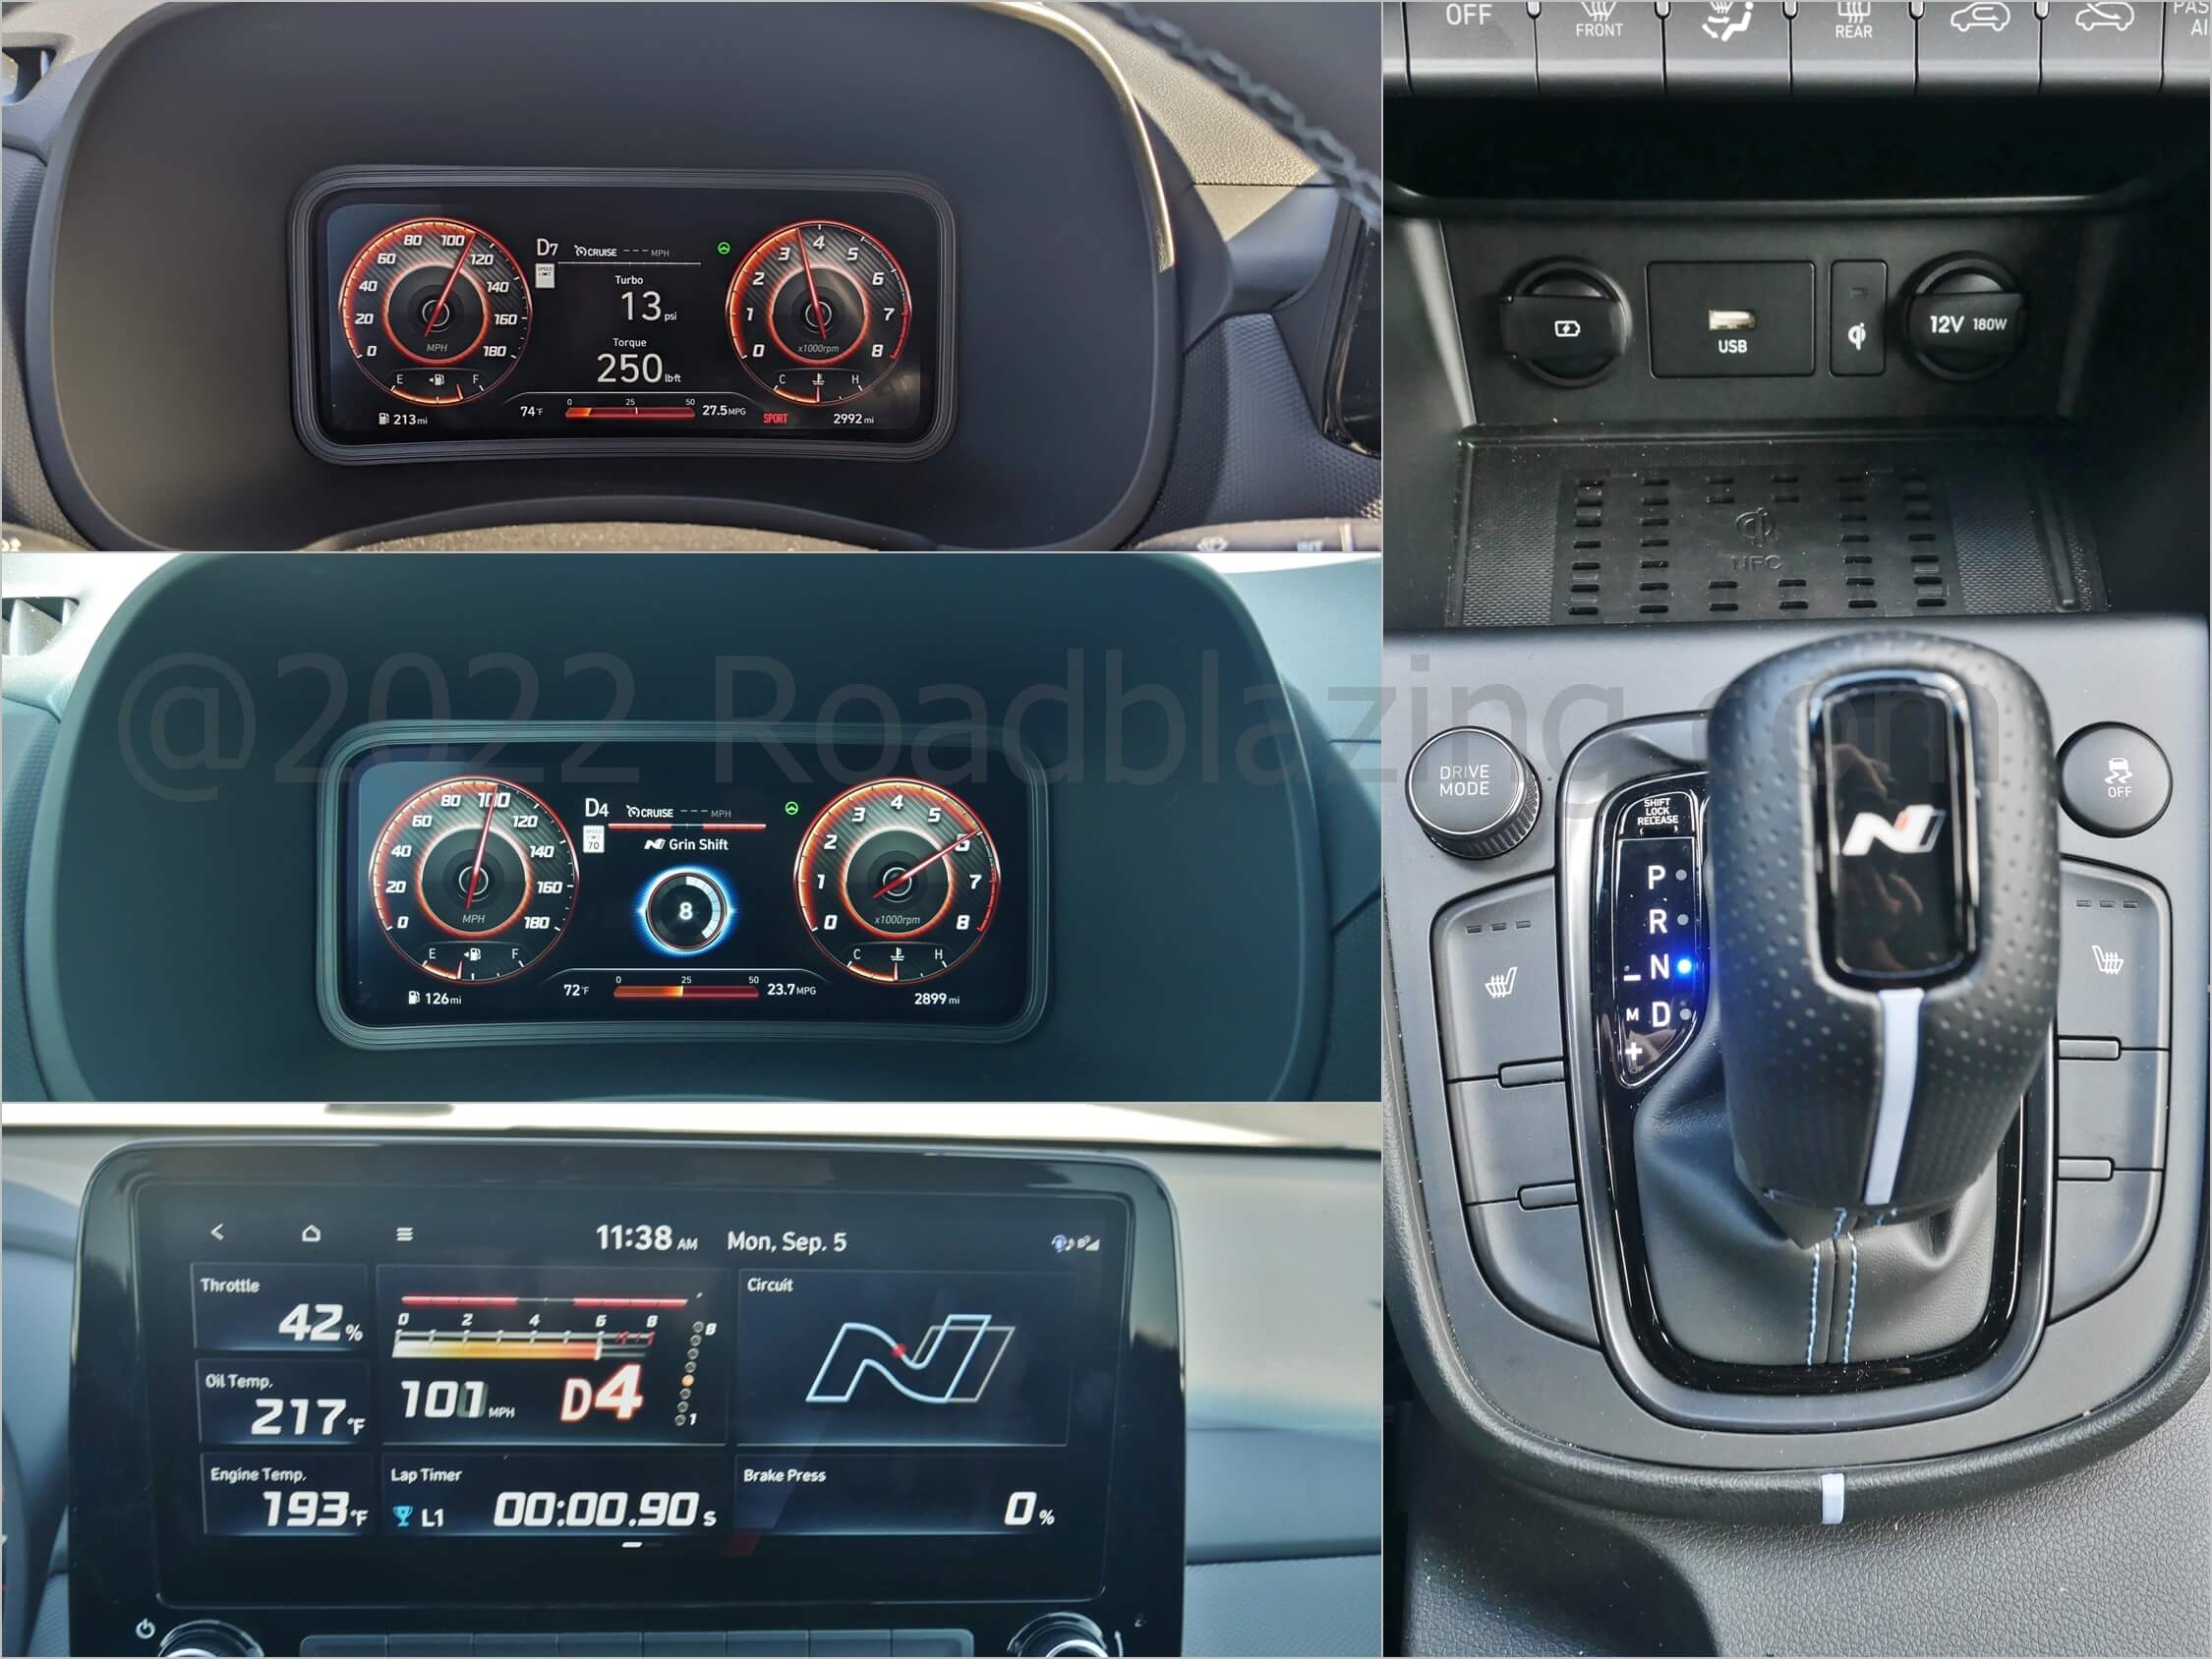 2022 Hyundai Kona DCT: N Grin Shift extracts provides twenty seconds with 10 hp for a total of 286.